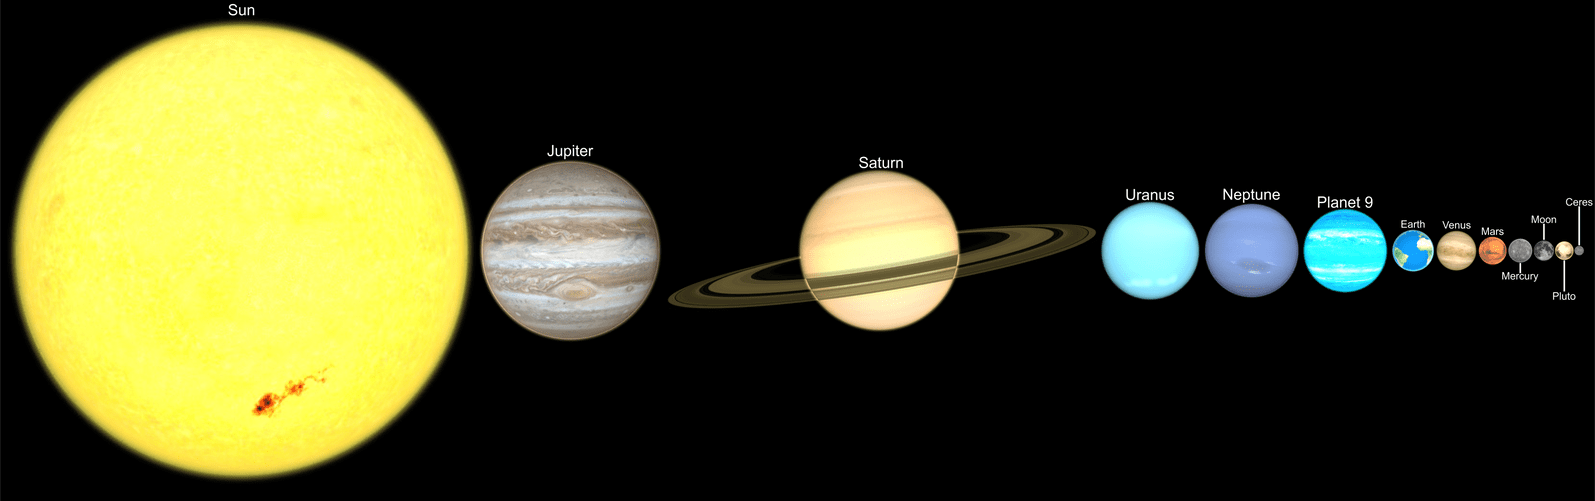 planets solar system compare chart